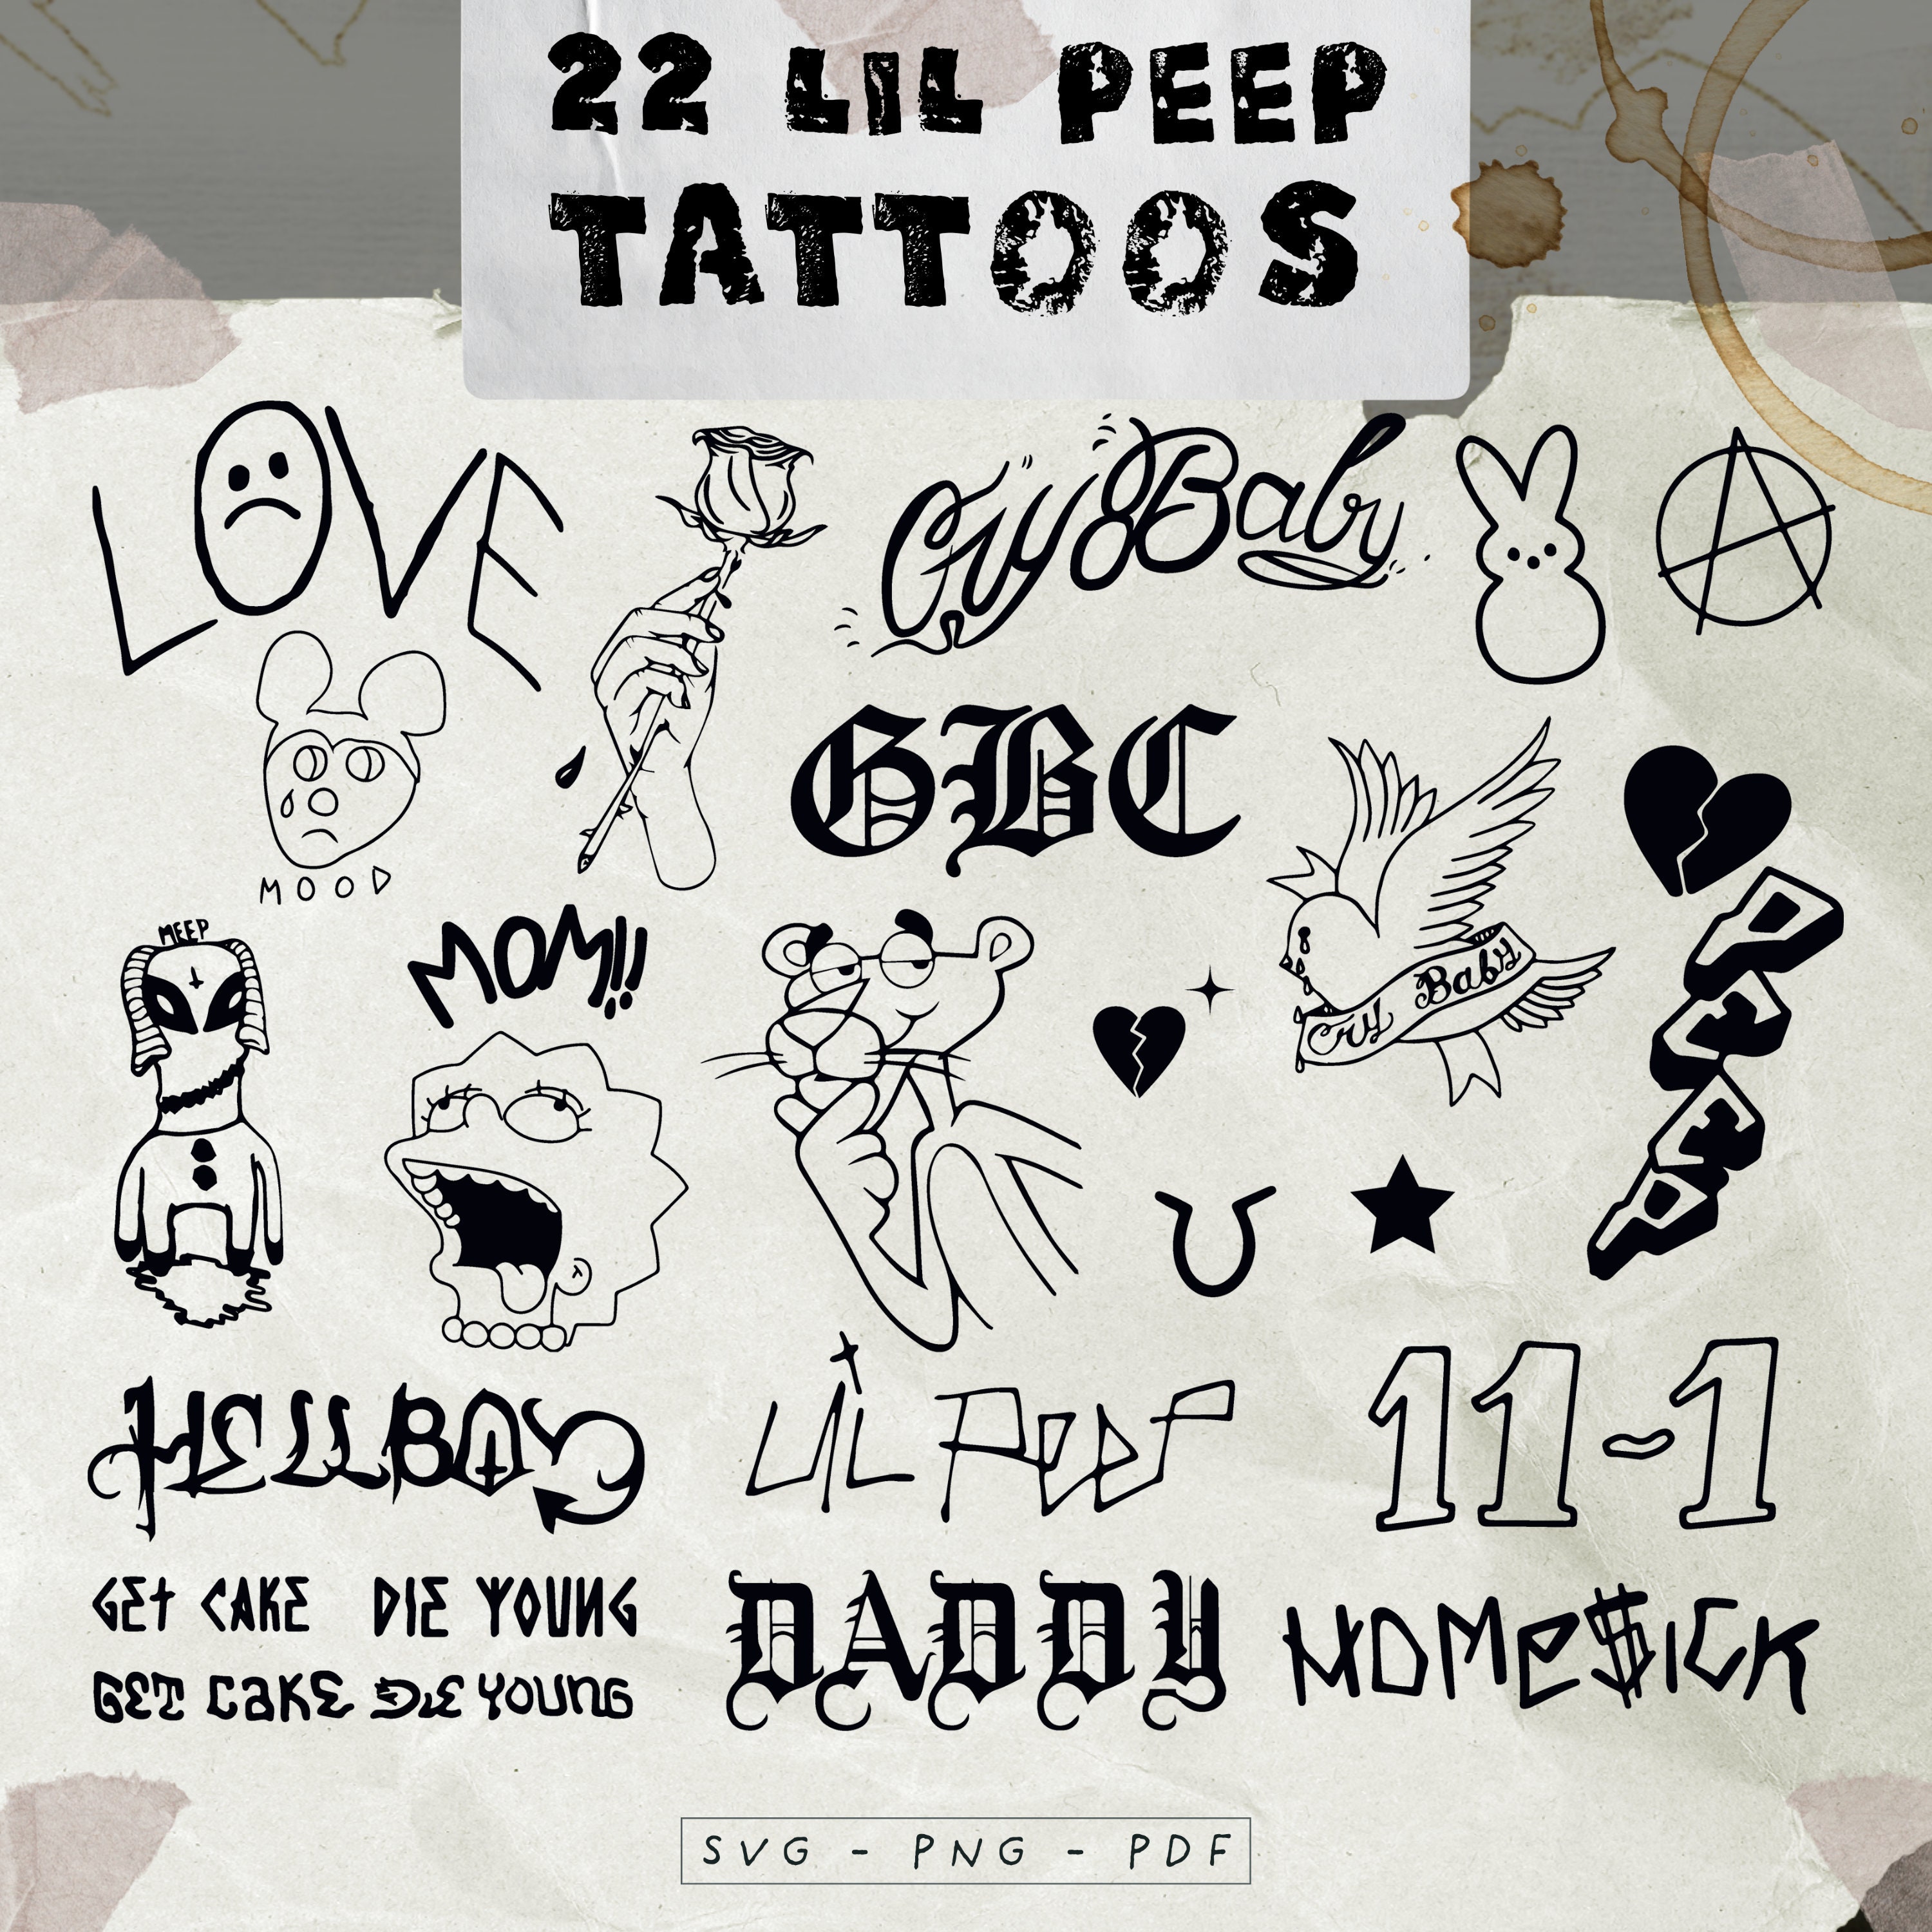 Update 69+ crybaby tattoo font latest - in.coedo.com.vn